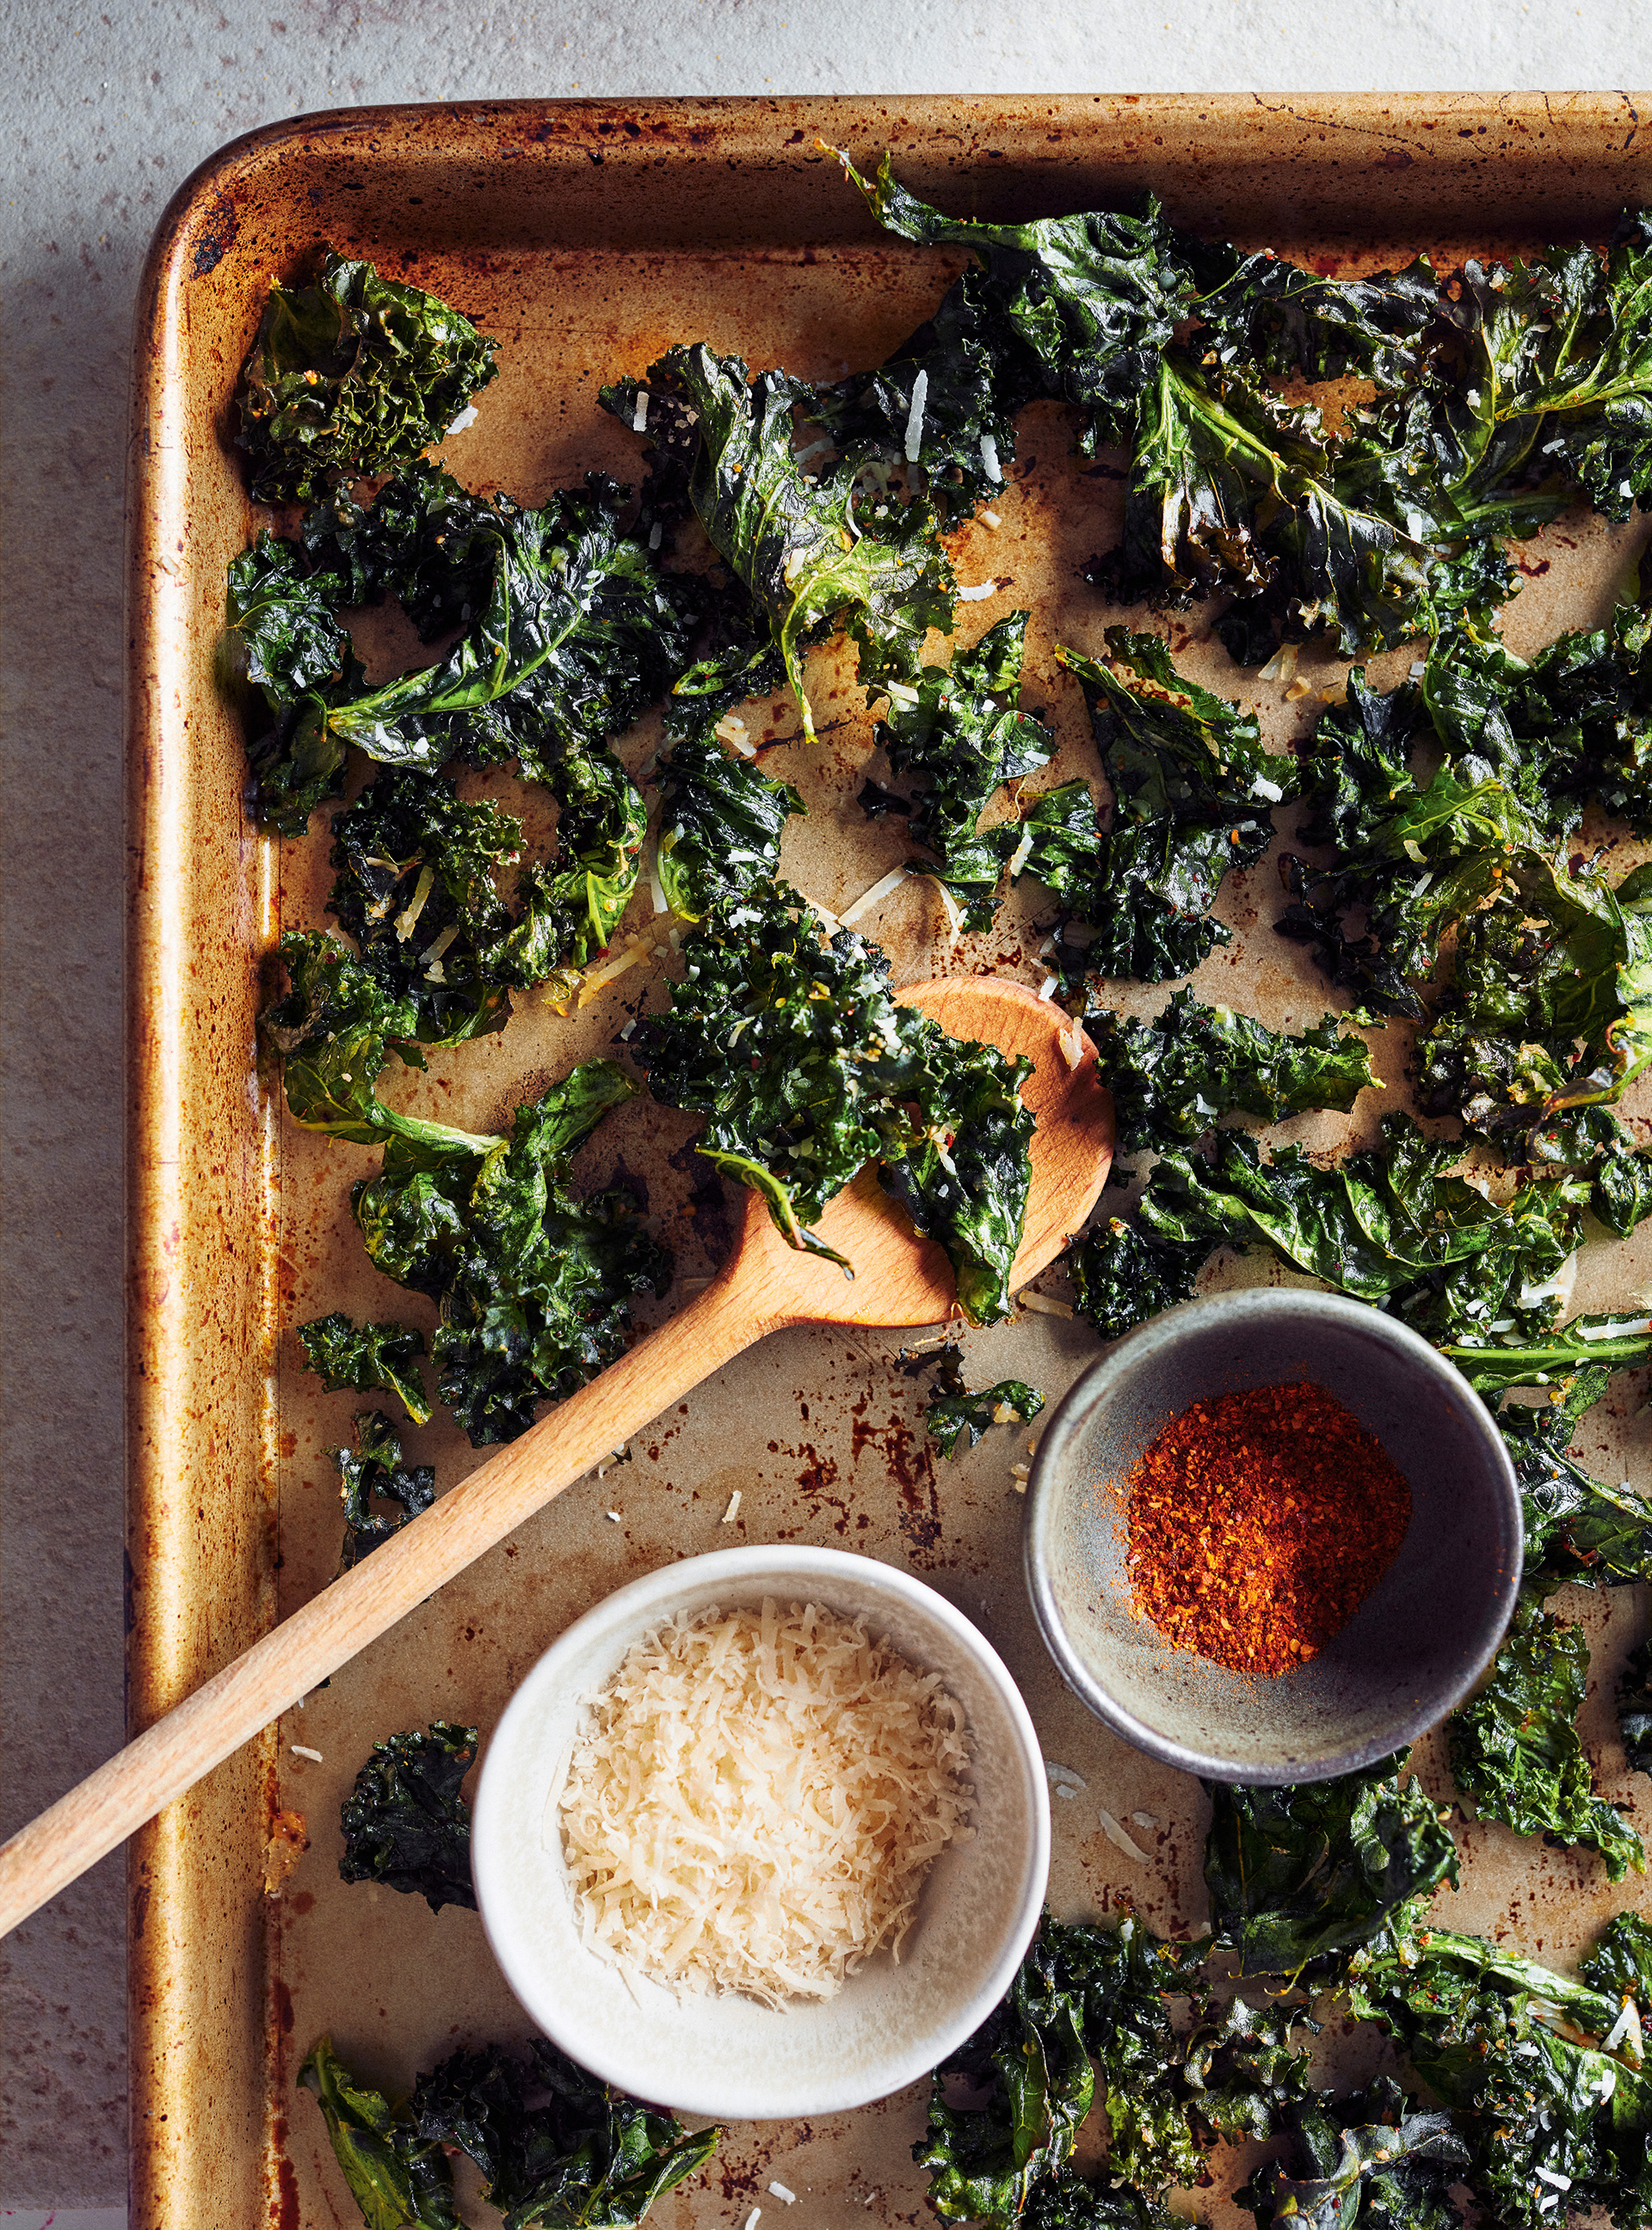 Spicy Kale Chips with Parmesan